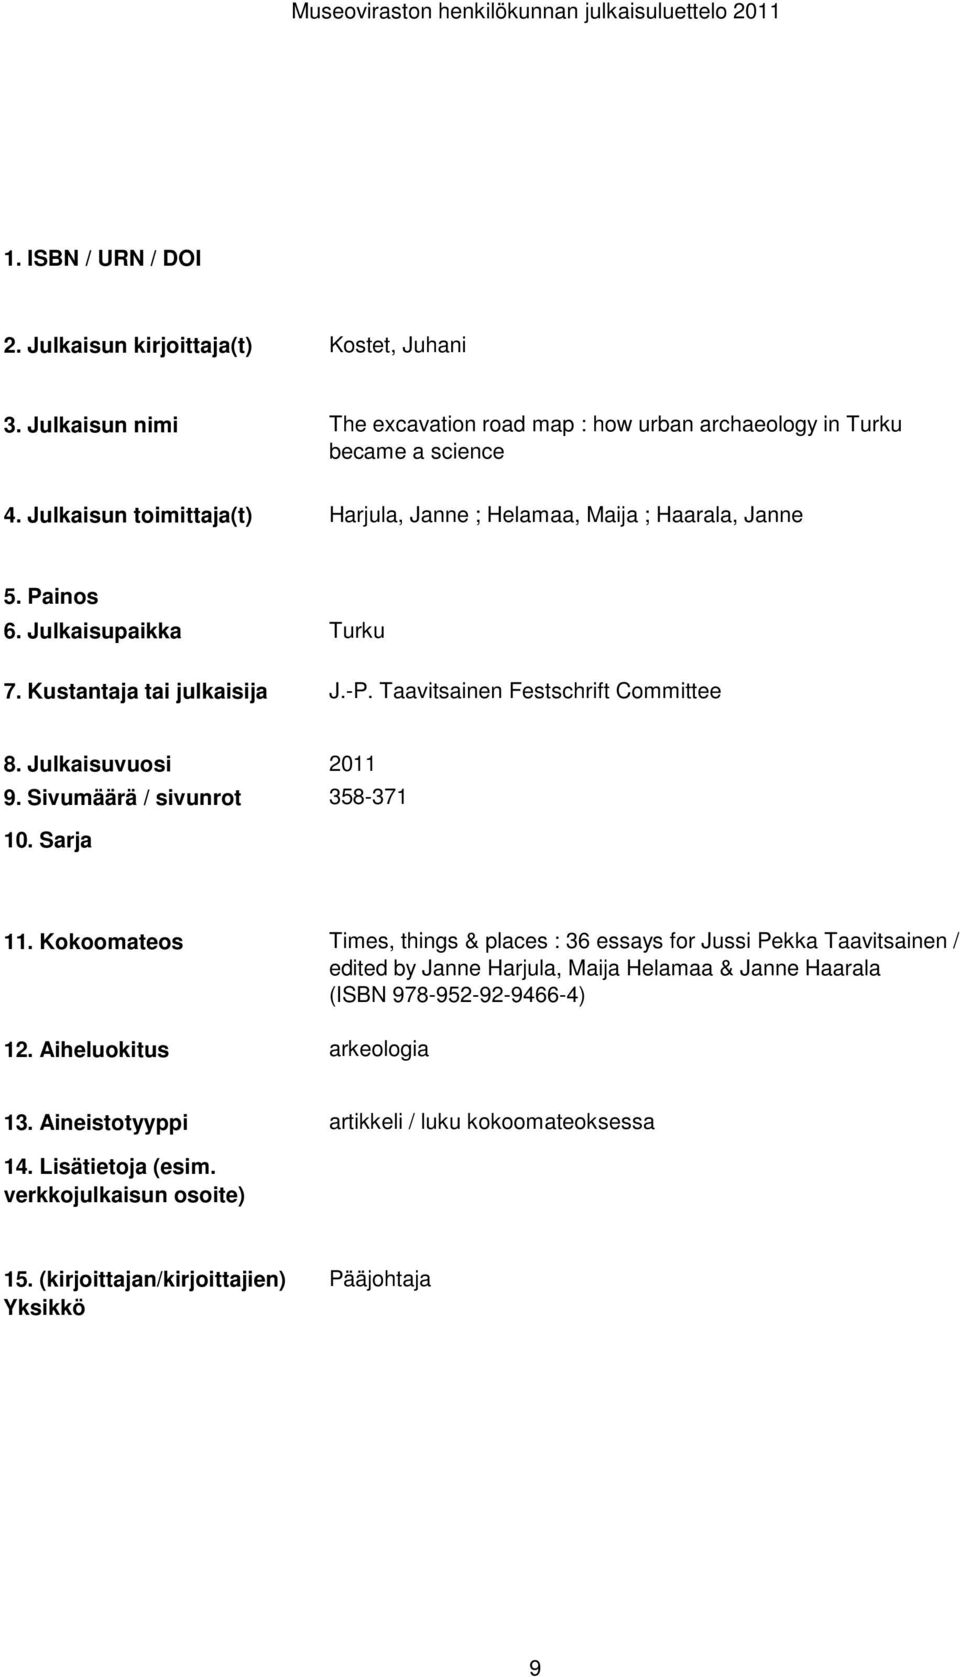 Taavitsainen Festschrift Committee 358-371 Times, things & places : 36 essays for Jussi Pekka